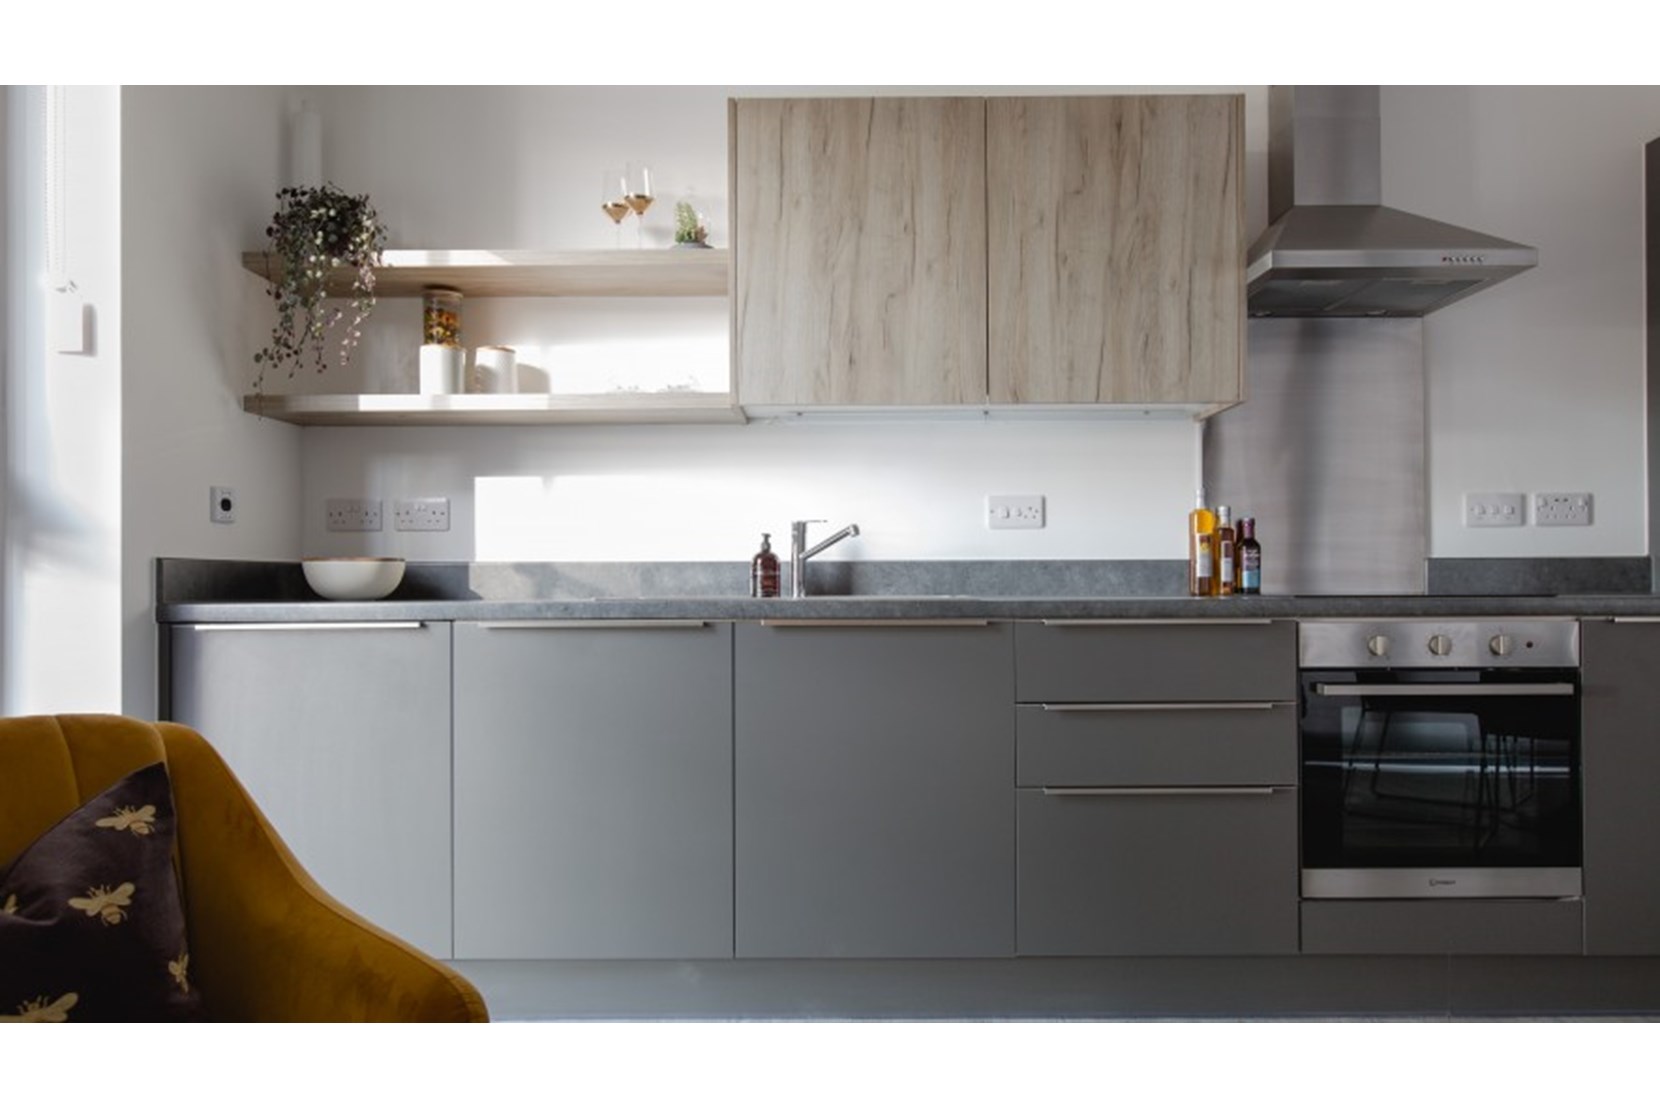 Apartments to Rent by Allsop at Vox, Manchester, M15, kitchen